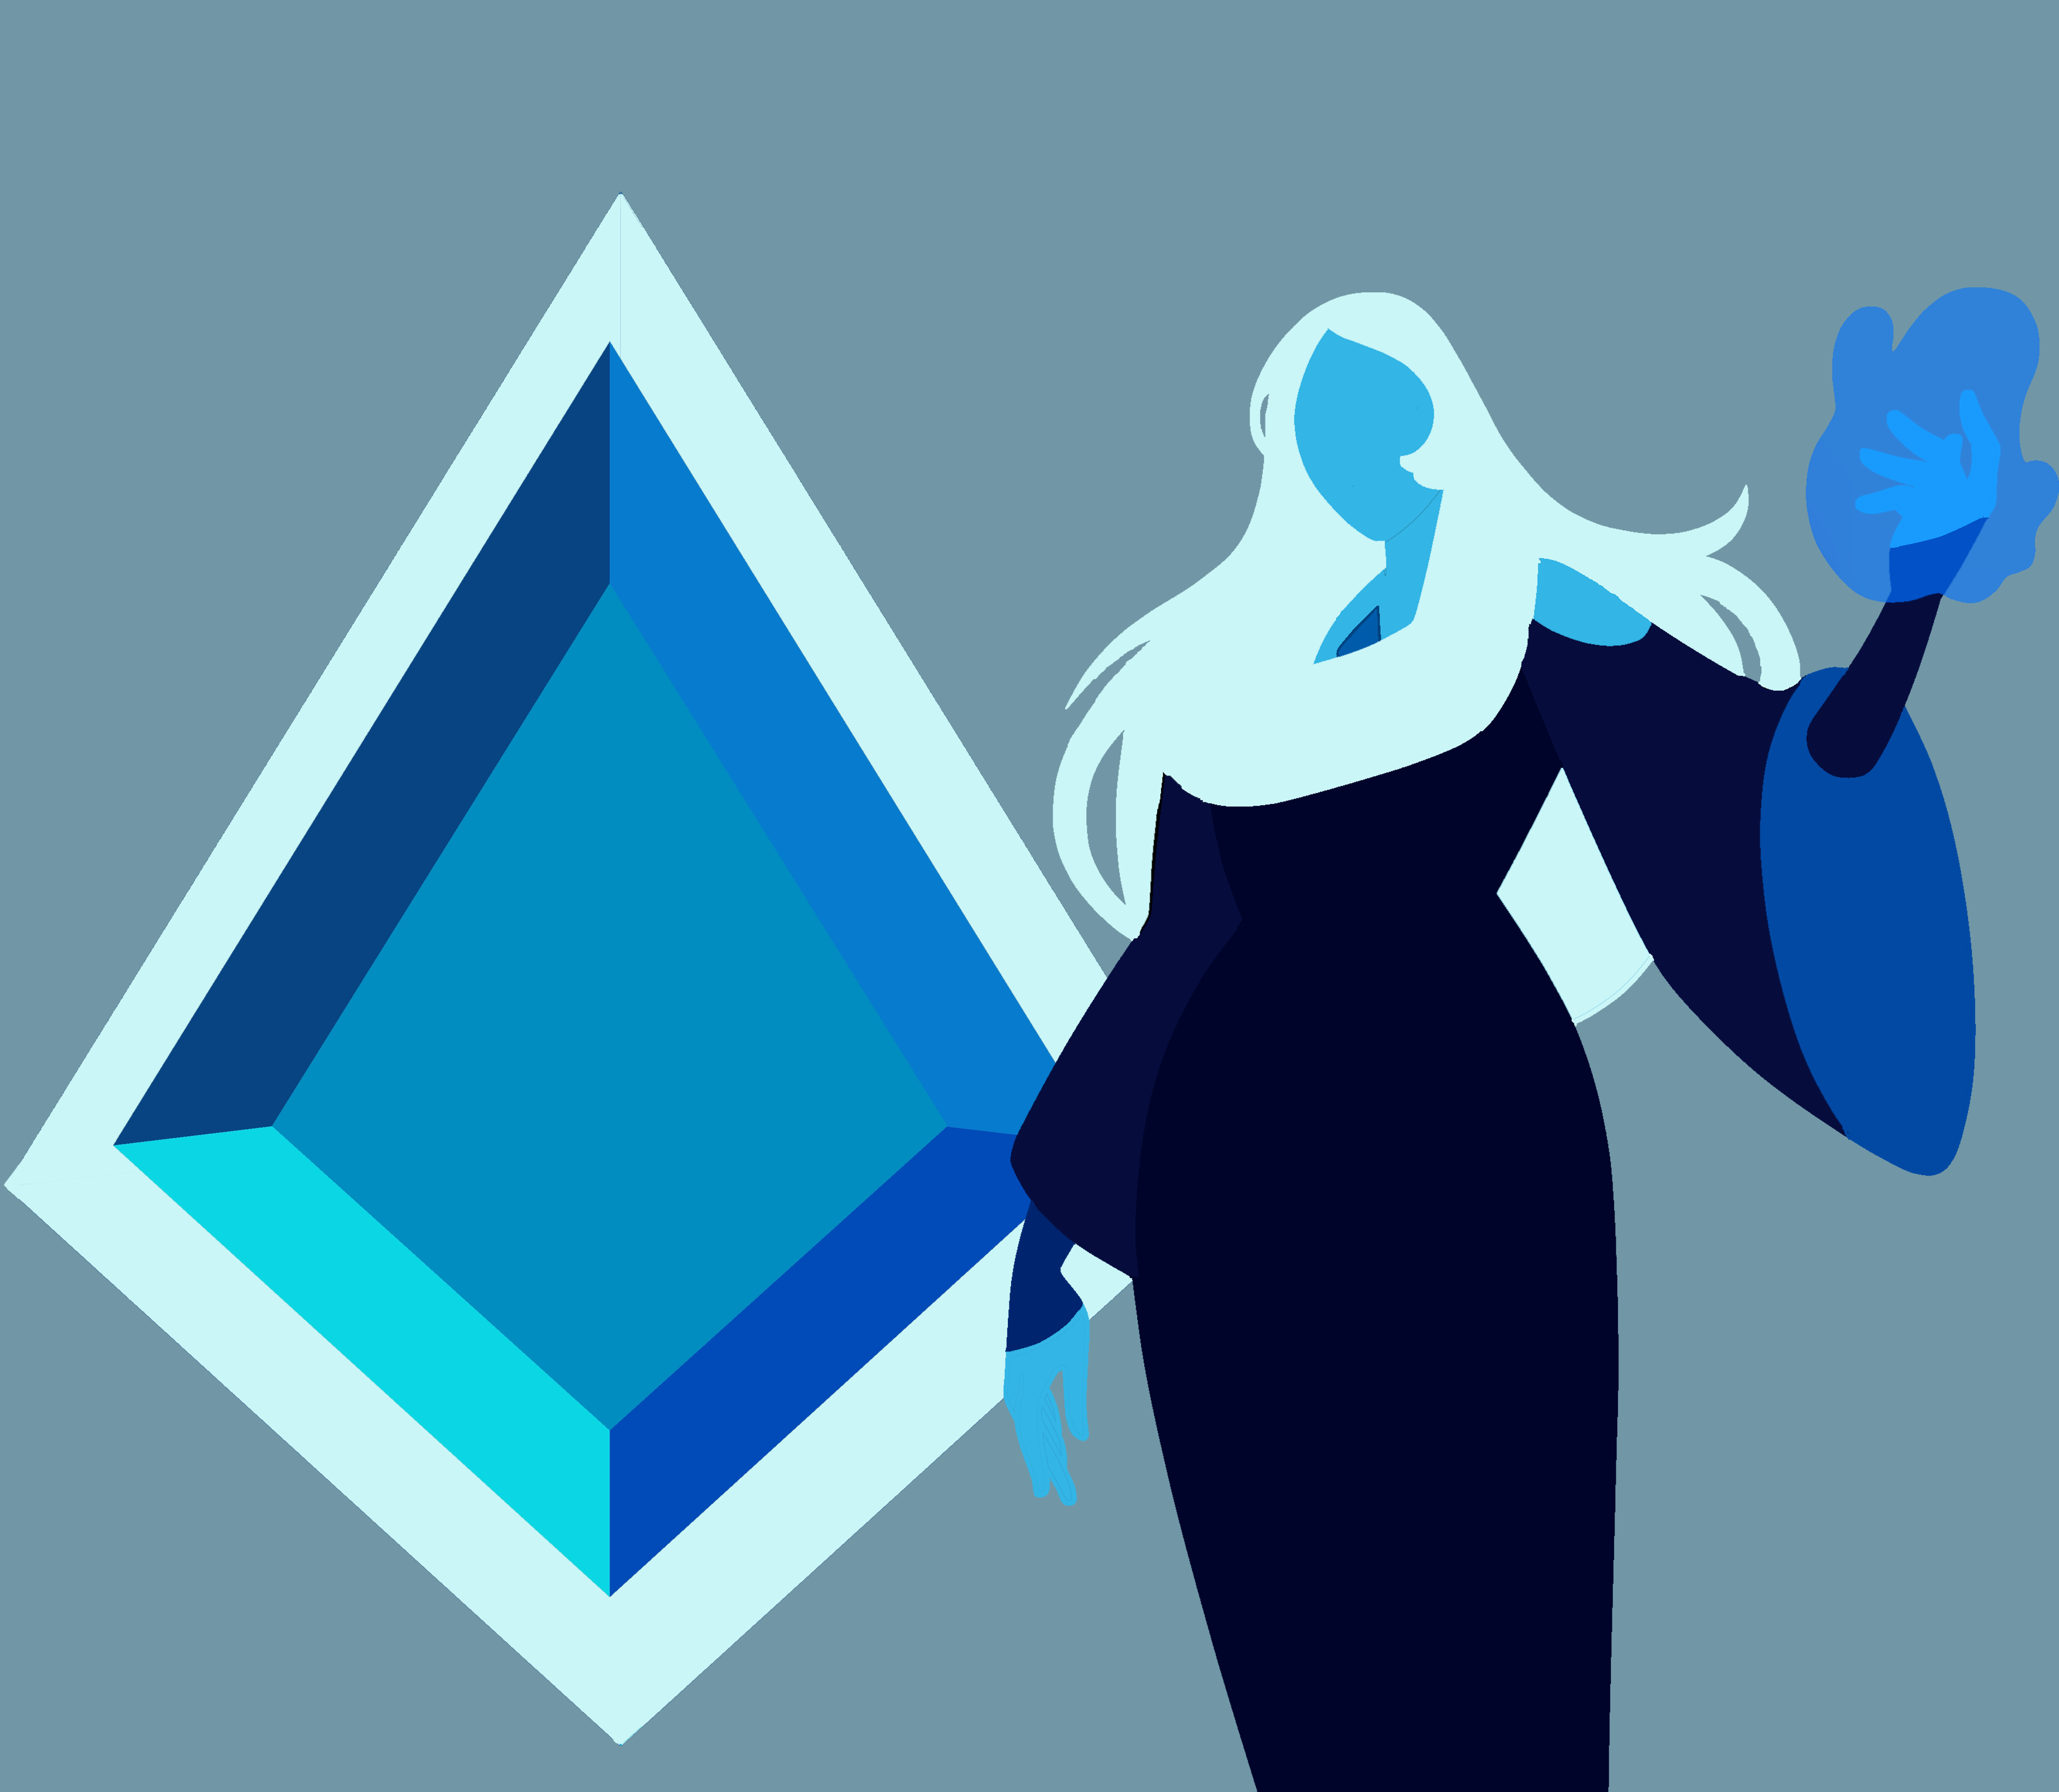 As people here asked me to to Blue Diamond wallpaper, well, here you go